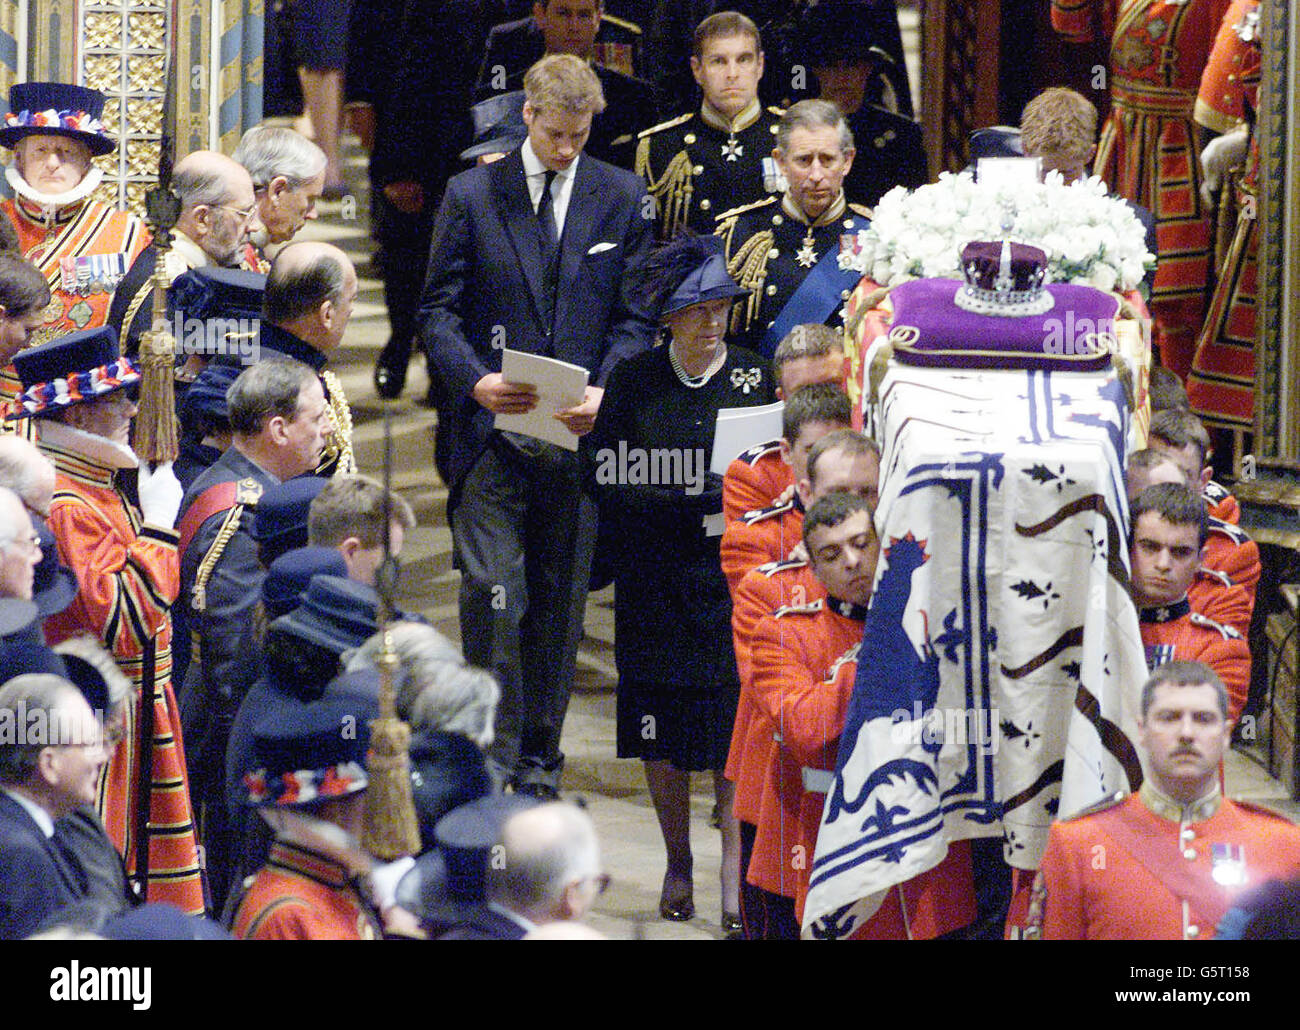 Members of the Royal Family including Queen Elizabeth II, Prince Charles, Prince William, Prince Harry, the Duke of York and the Earl and Countess of Wessex follow on behind the coffin of Queen Elizabeth, the Queen Mother at Westminster Abbey. *The Queen Mother died Saturday March 30, 2002, aged 101. After the service, the Queen's Mother's coffin was due to be taken to St George's Chapel in Windsor, where she will be laid to rest next to her husband, King George VI. Stock Photo